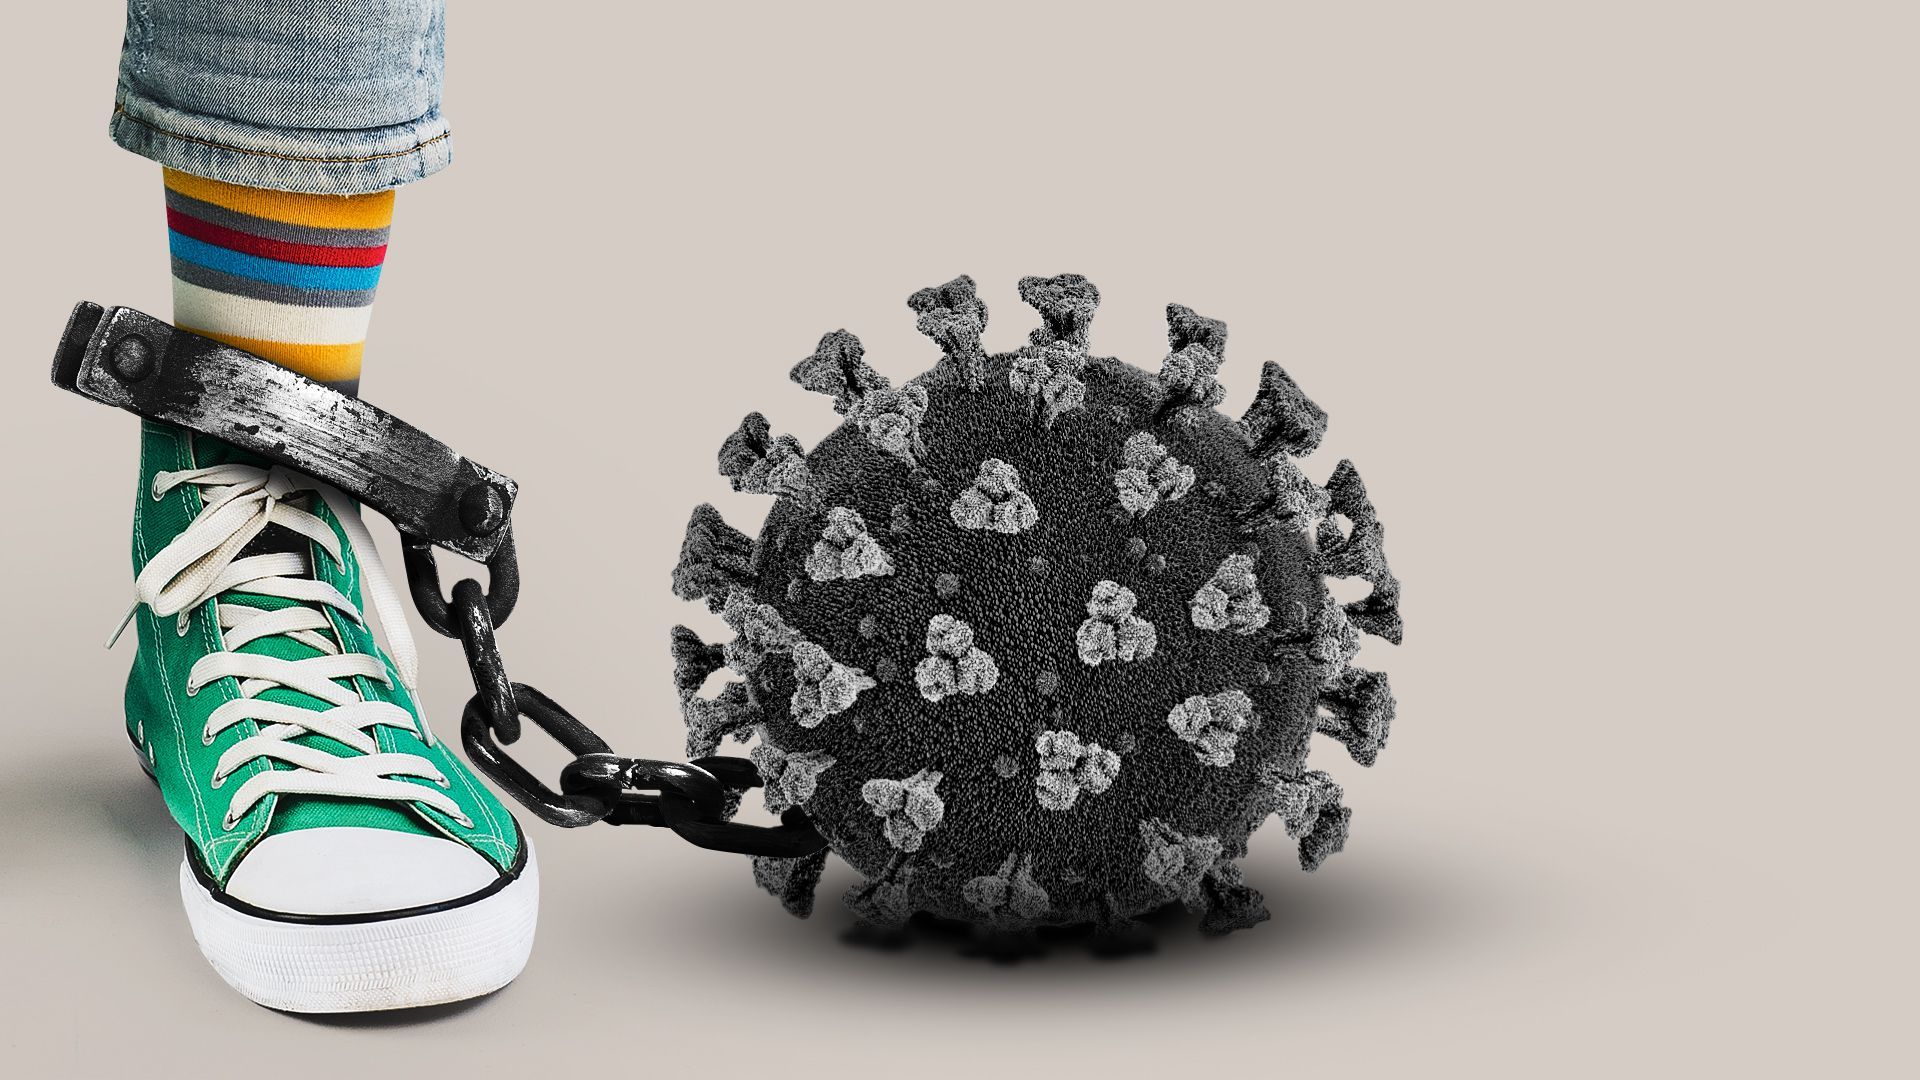 Illustration of a young person's leg wearing a ball and chain made from a large coronavirus cell. 